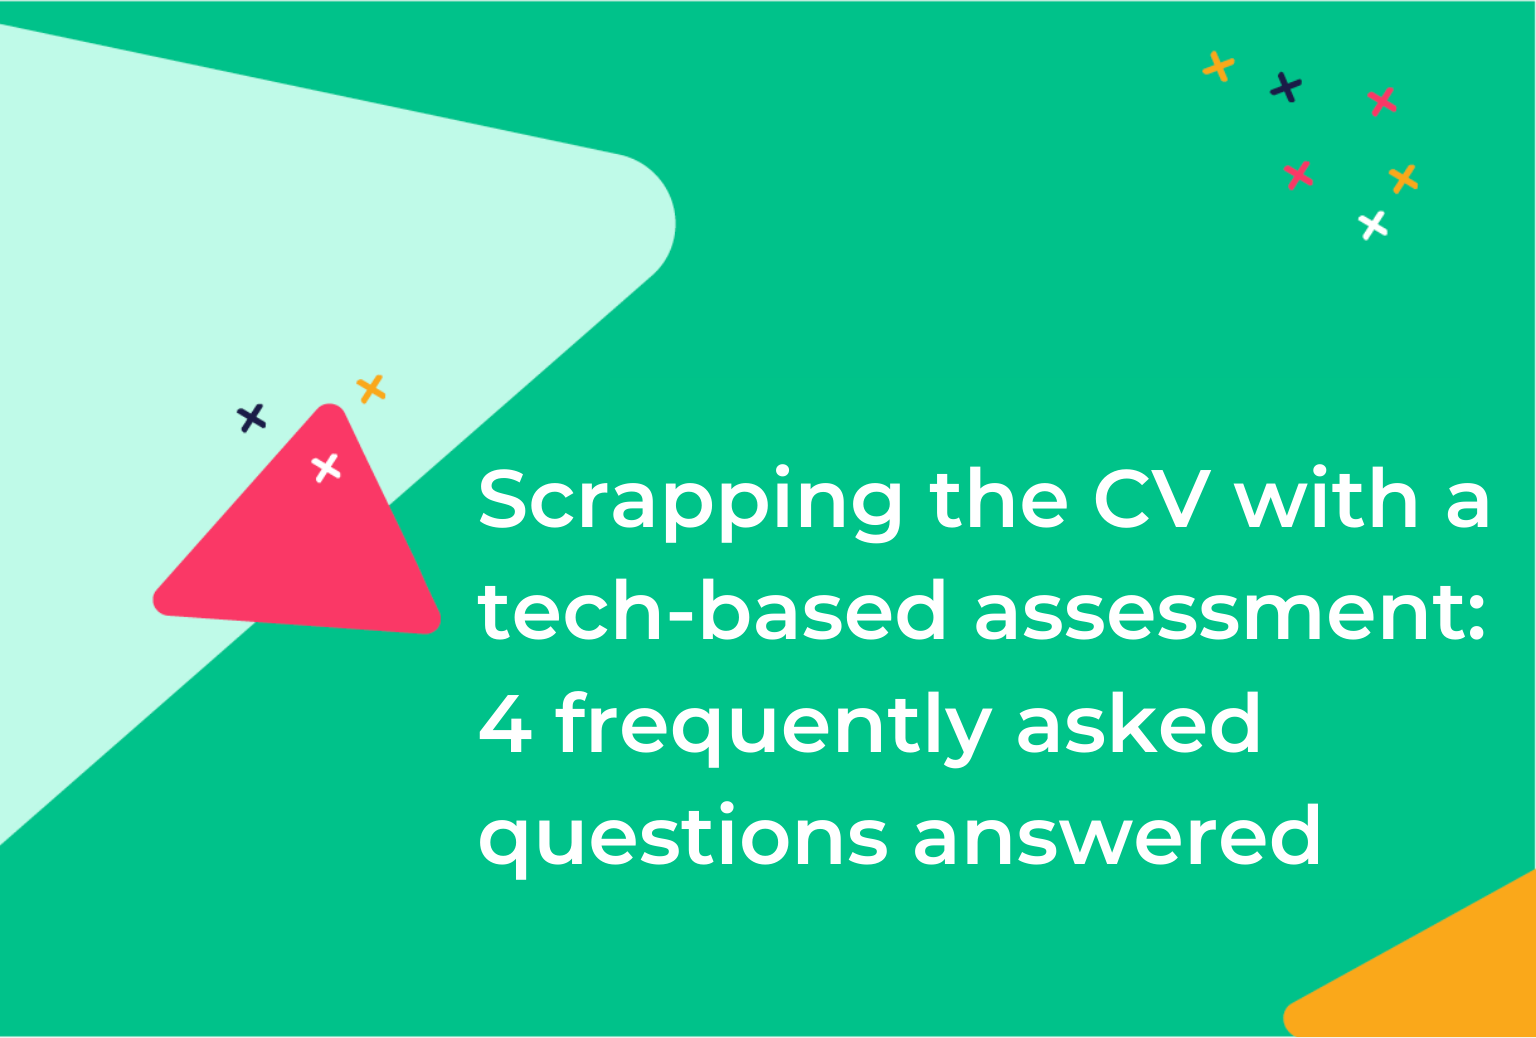 Scrapping the CV with a tech-based assessment: 4 frequently asked questions answered